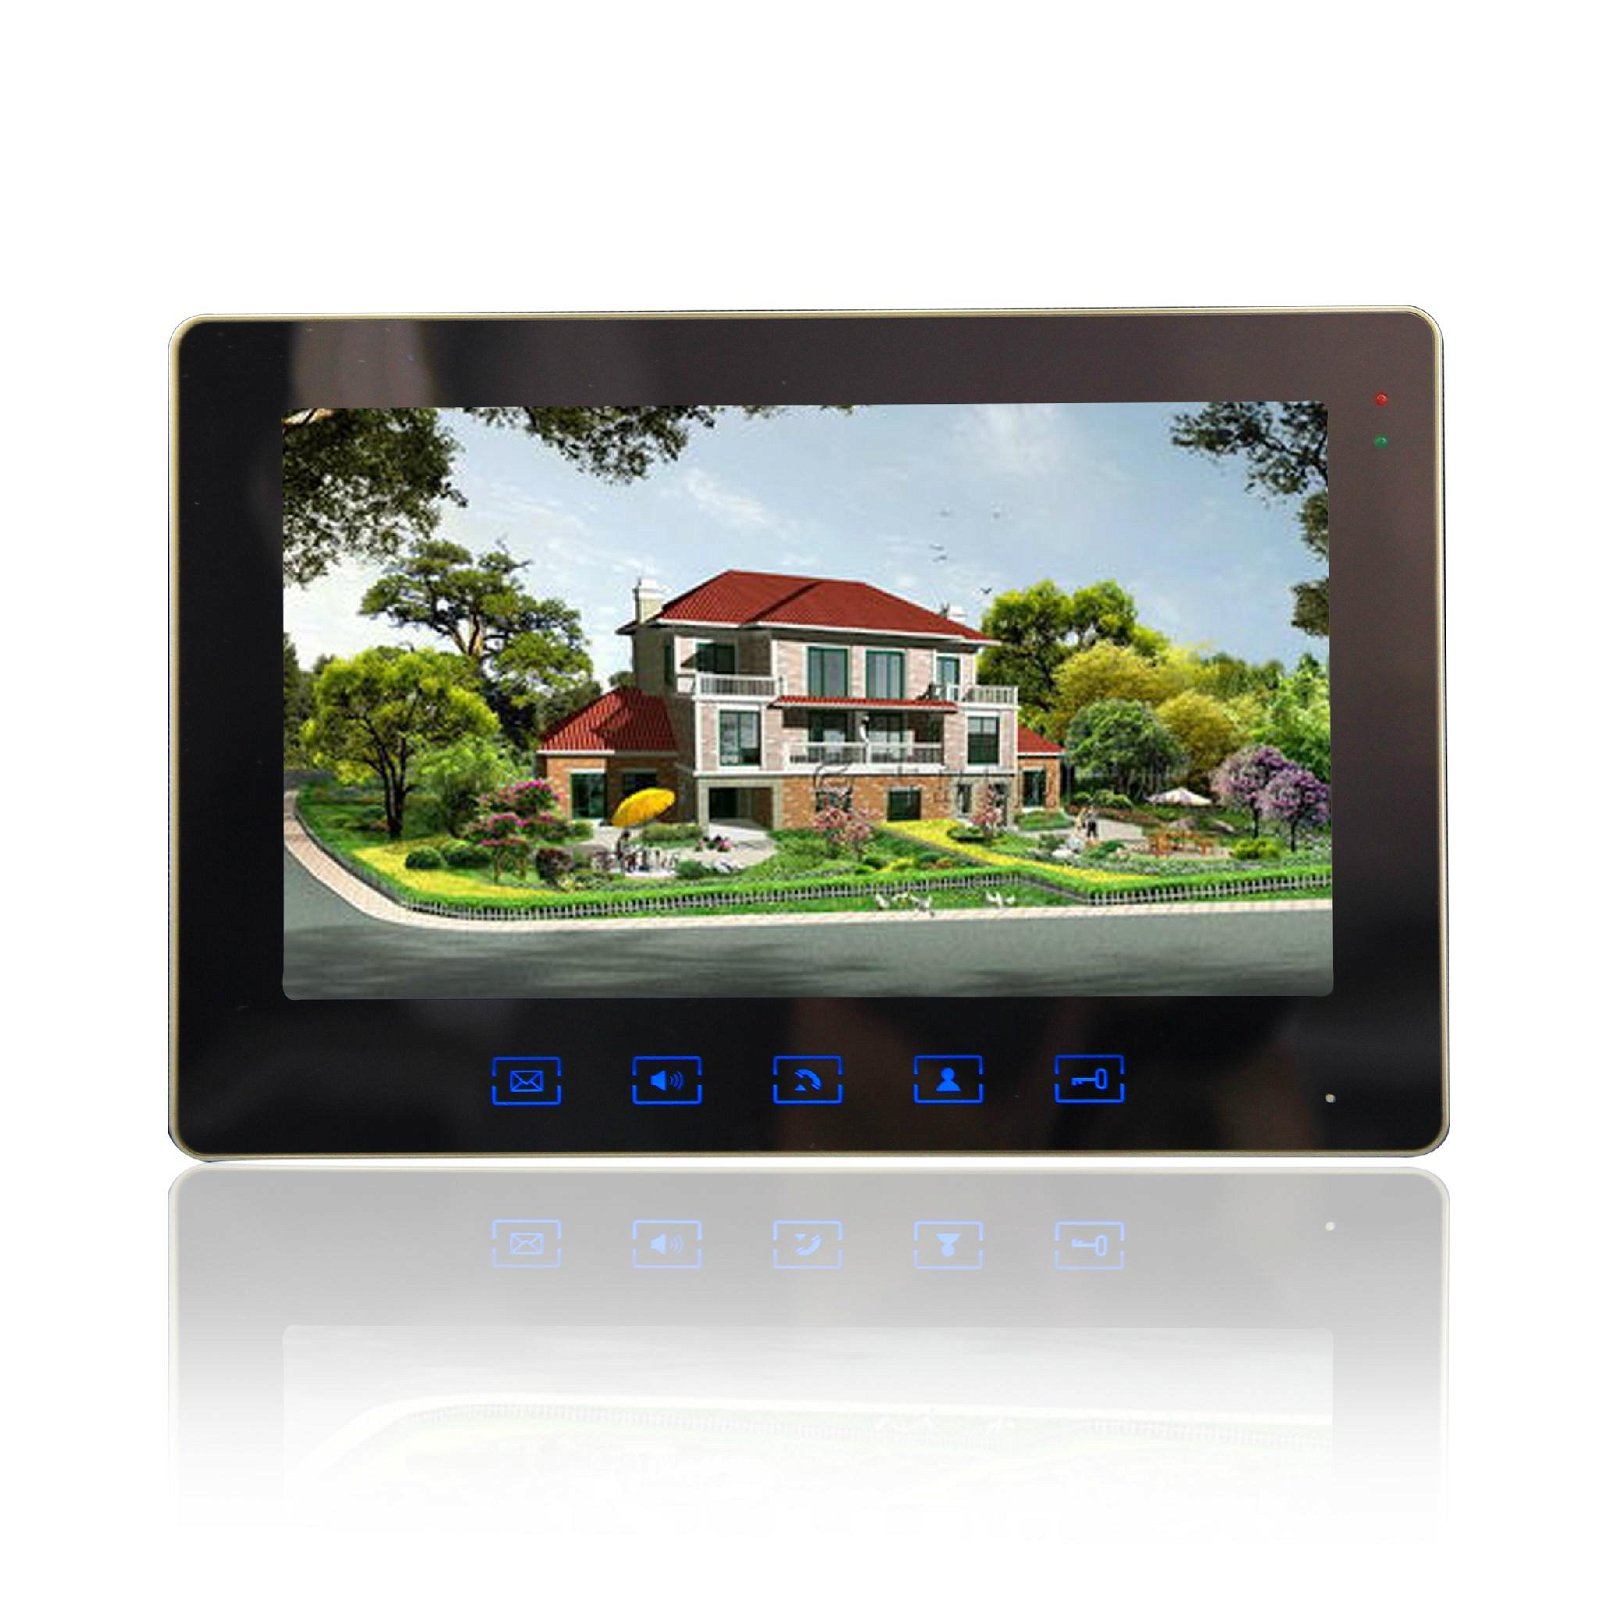 Video intercom system with access control for residential